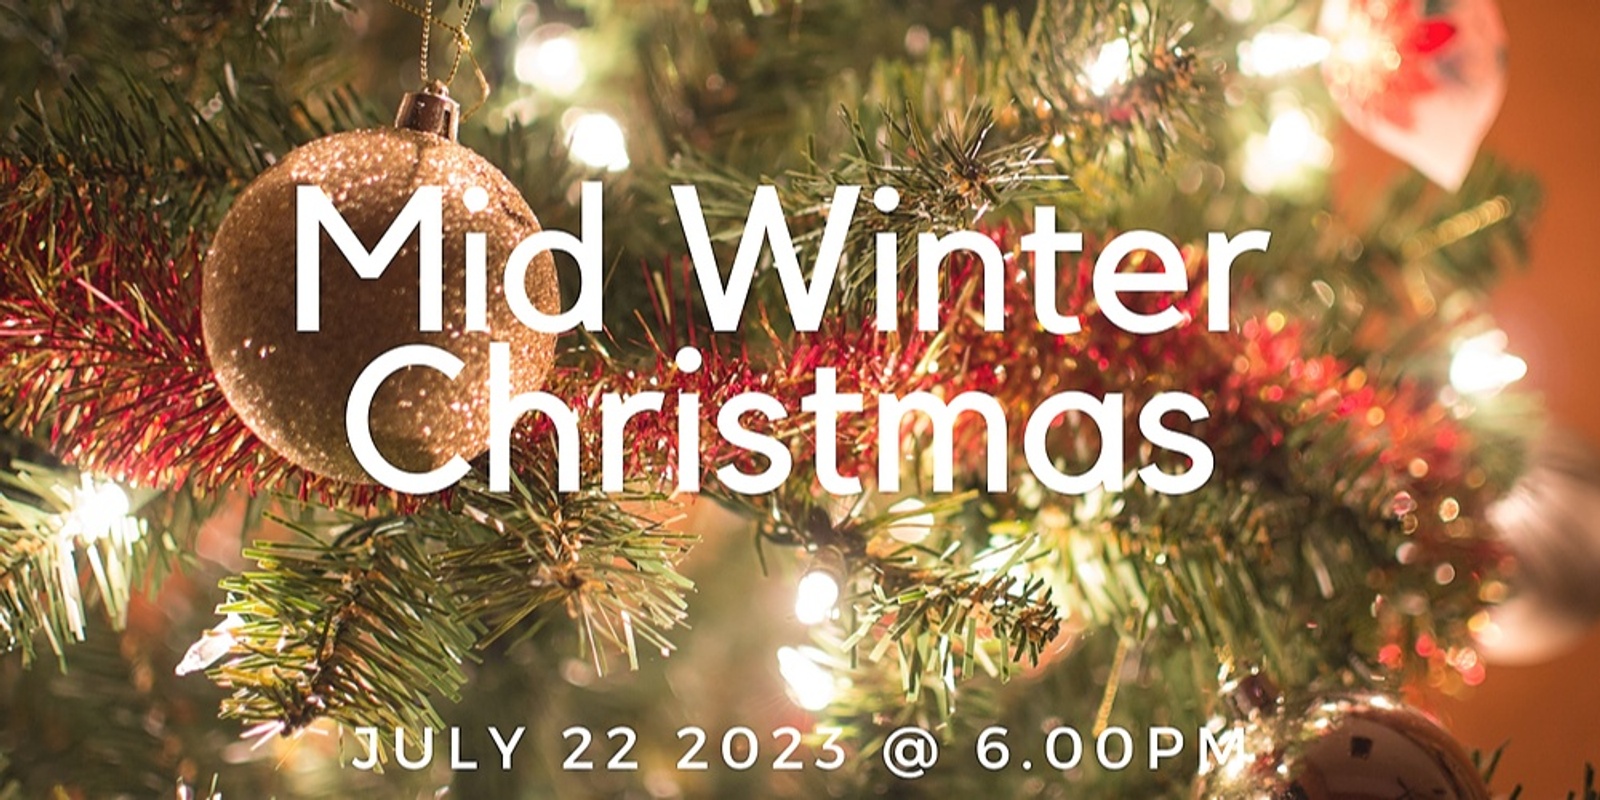 Banner image for Mid Winter Christmas